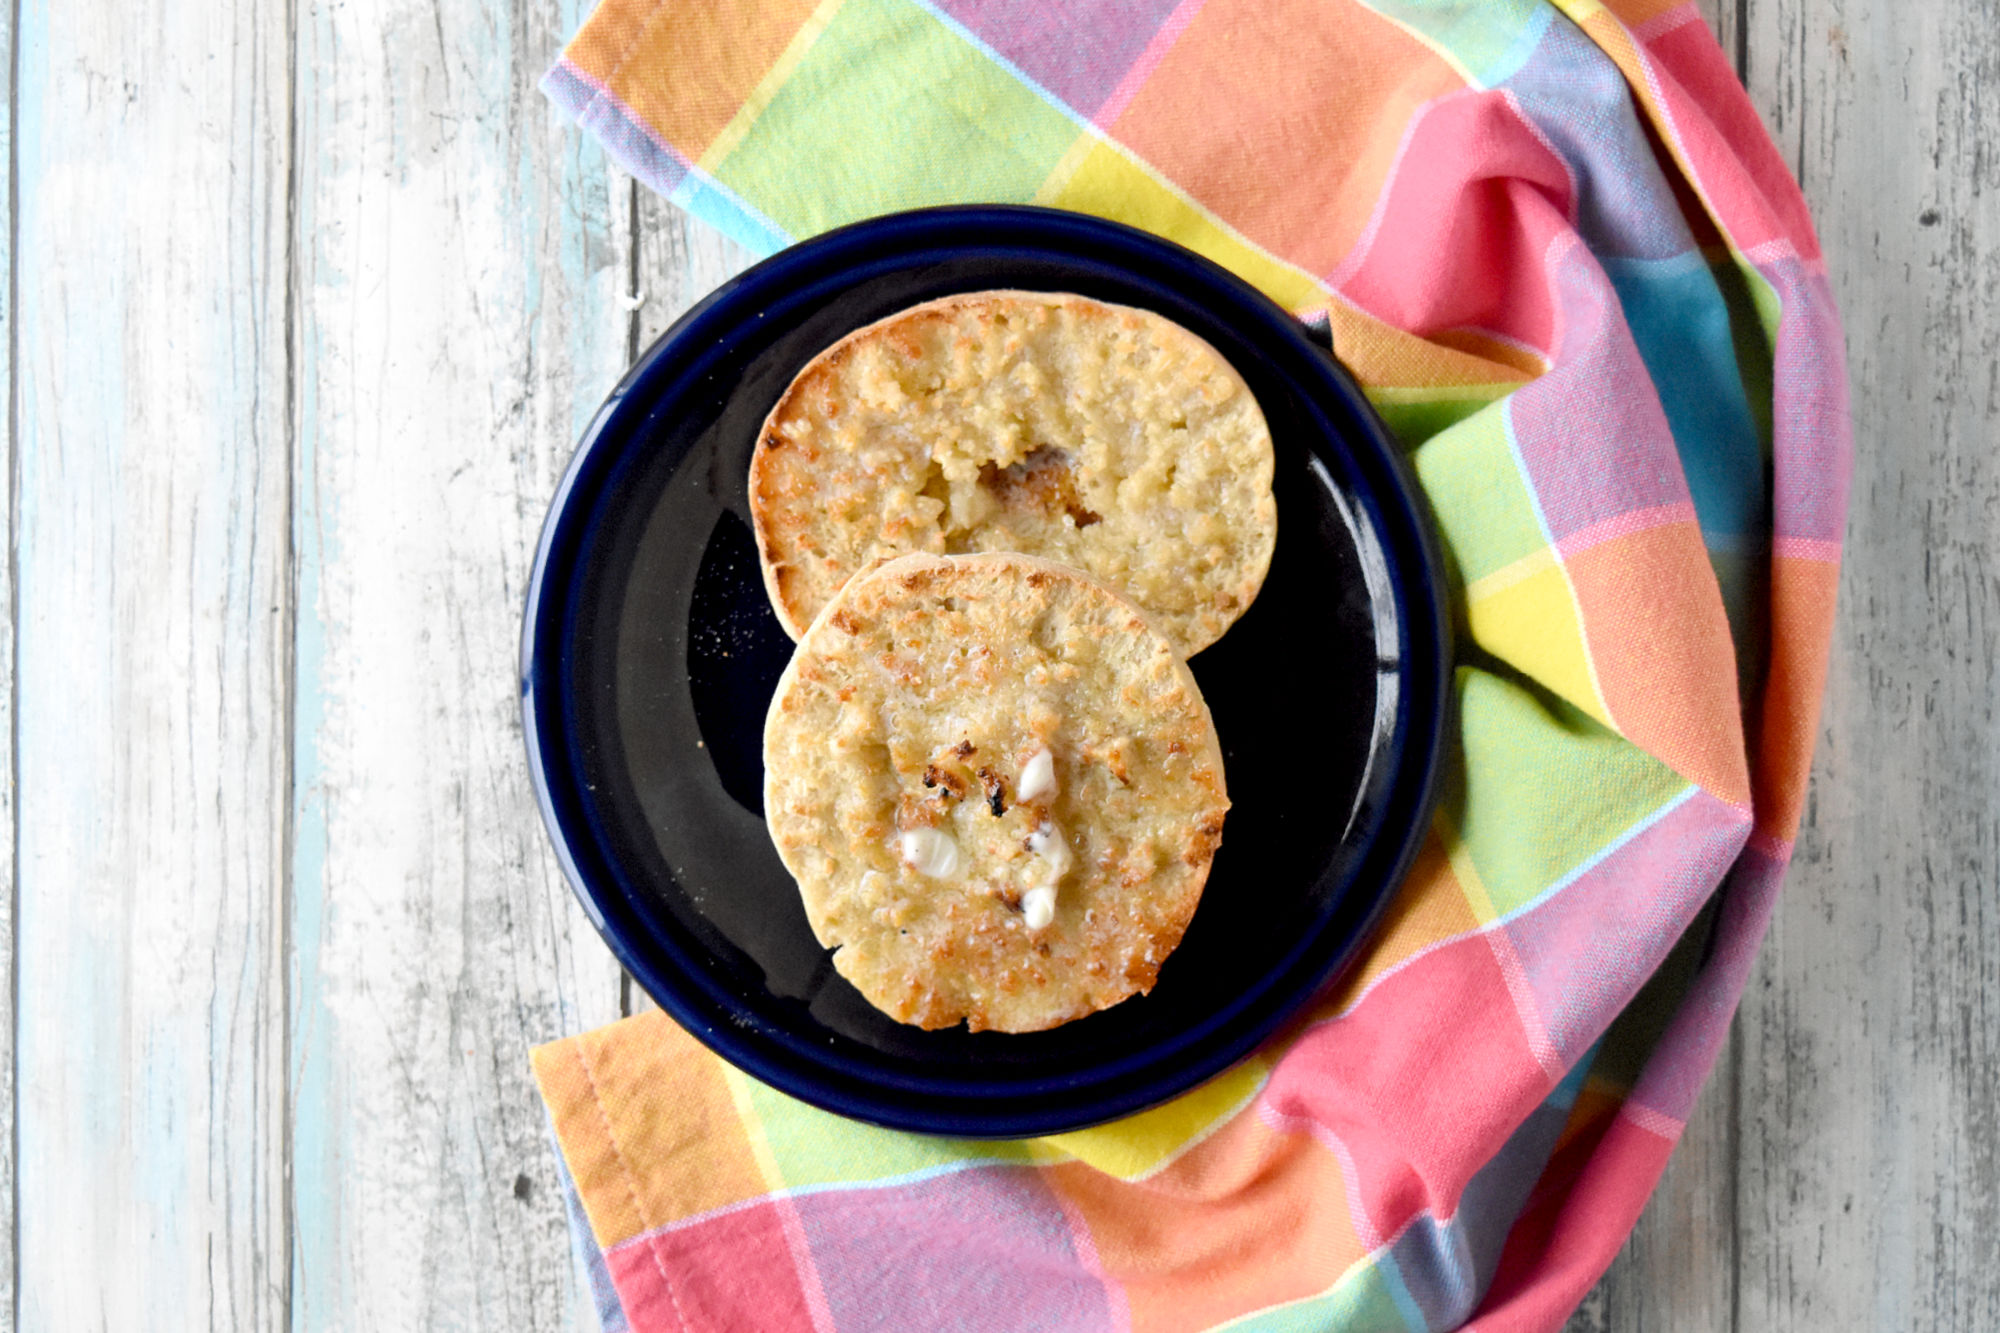 Sourdough English Muffins are easy to make and are a delicious change from your typical breakfast bread. They make the best muffin sandwiches, too! #BrunchWeek #sourdough #sourdoughstarter  #discaredrecipe #breadrecipe #Englishmuffins
